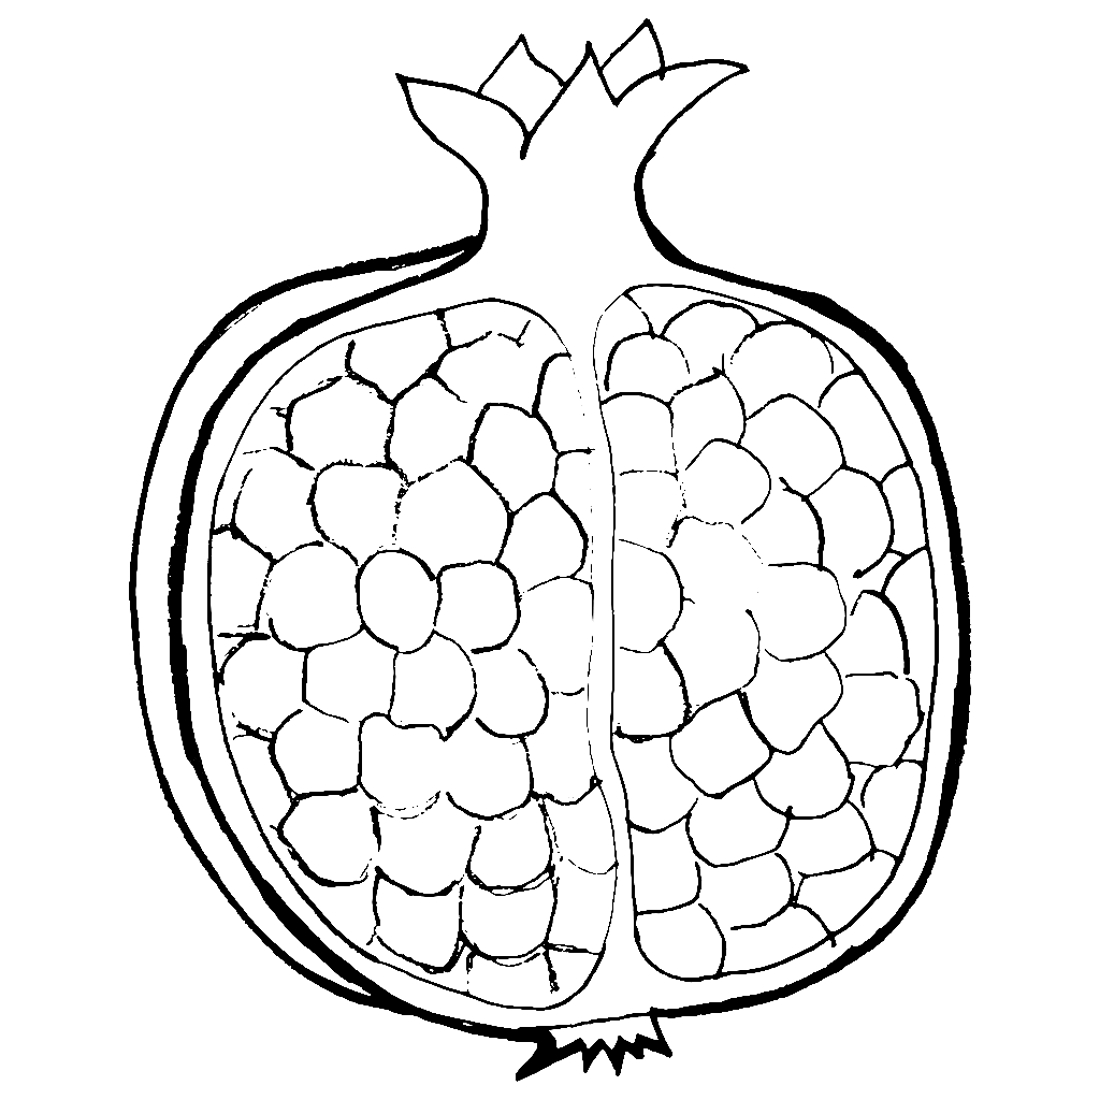 Garnet fruit coloring pages to download and print for free